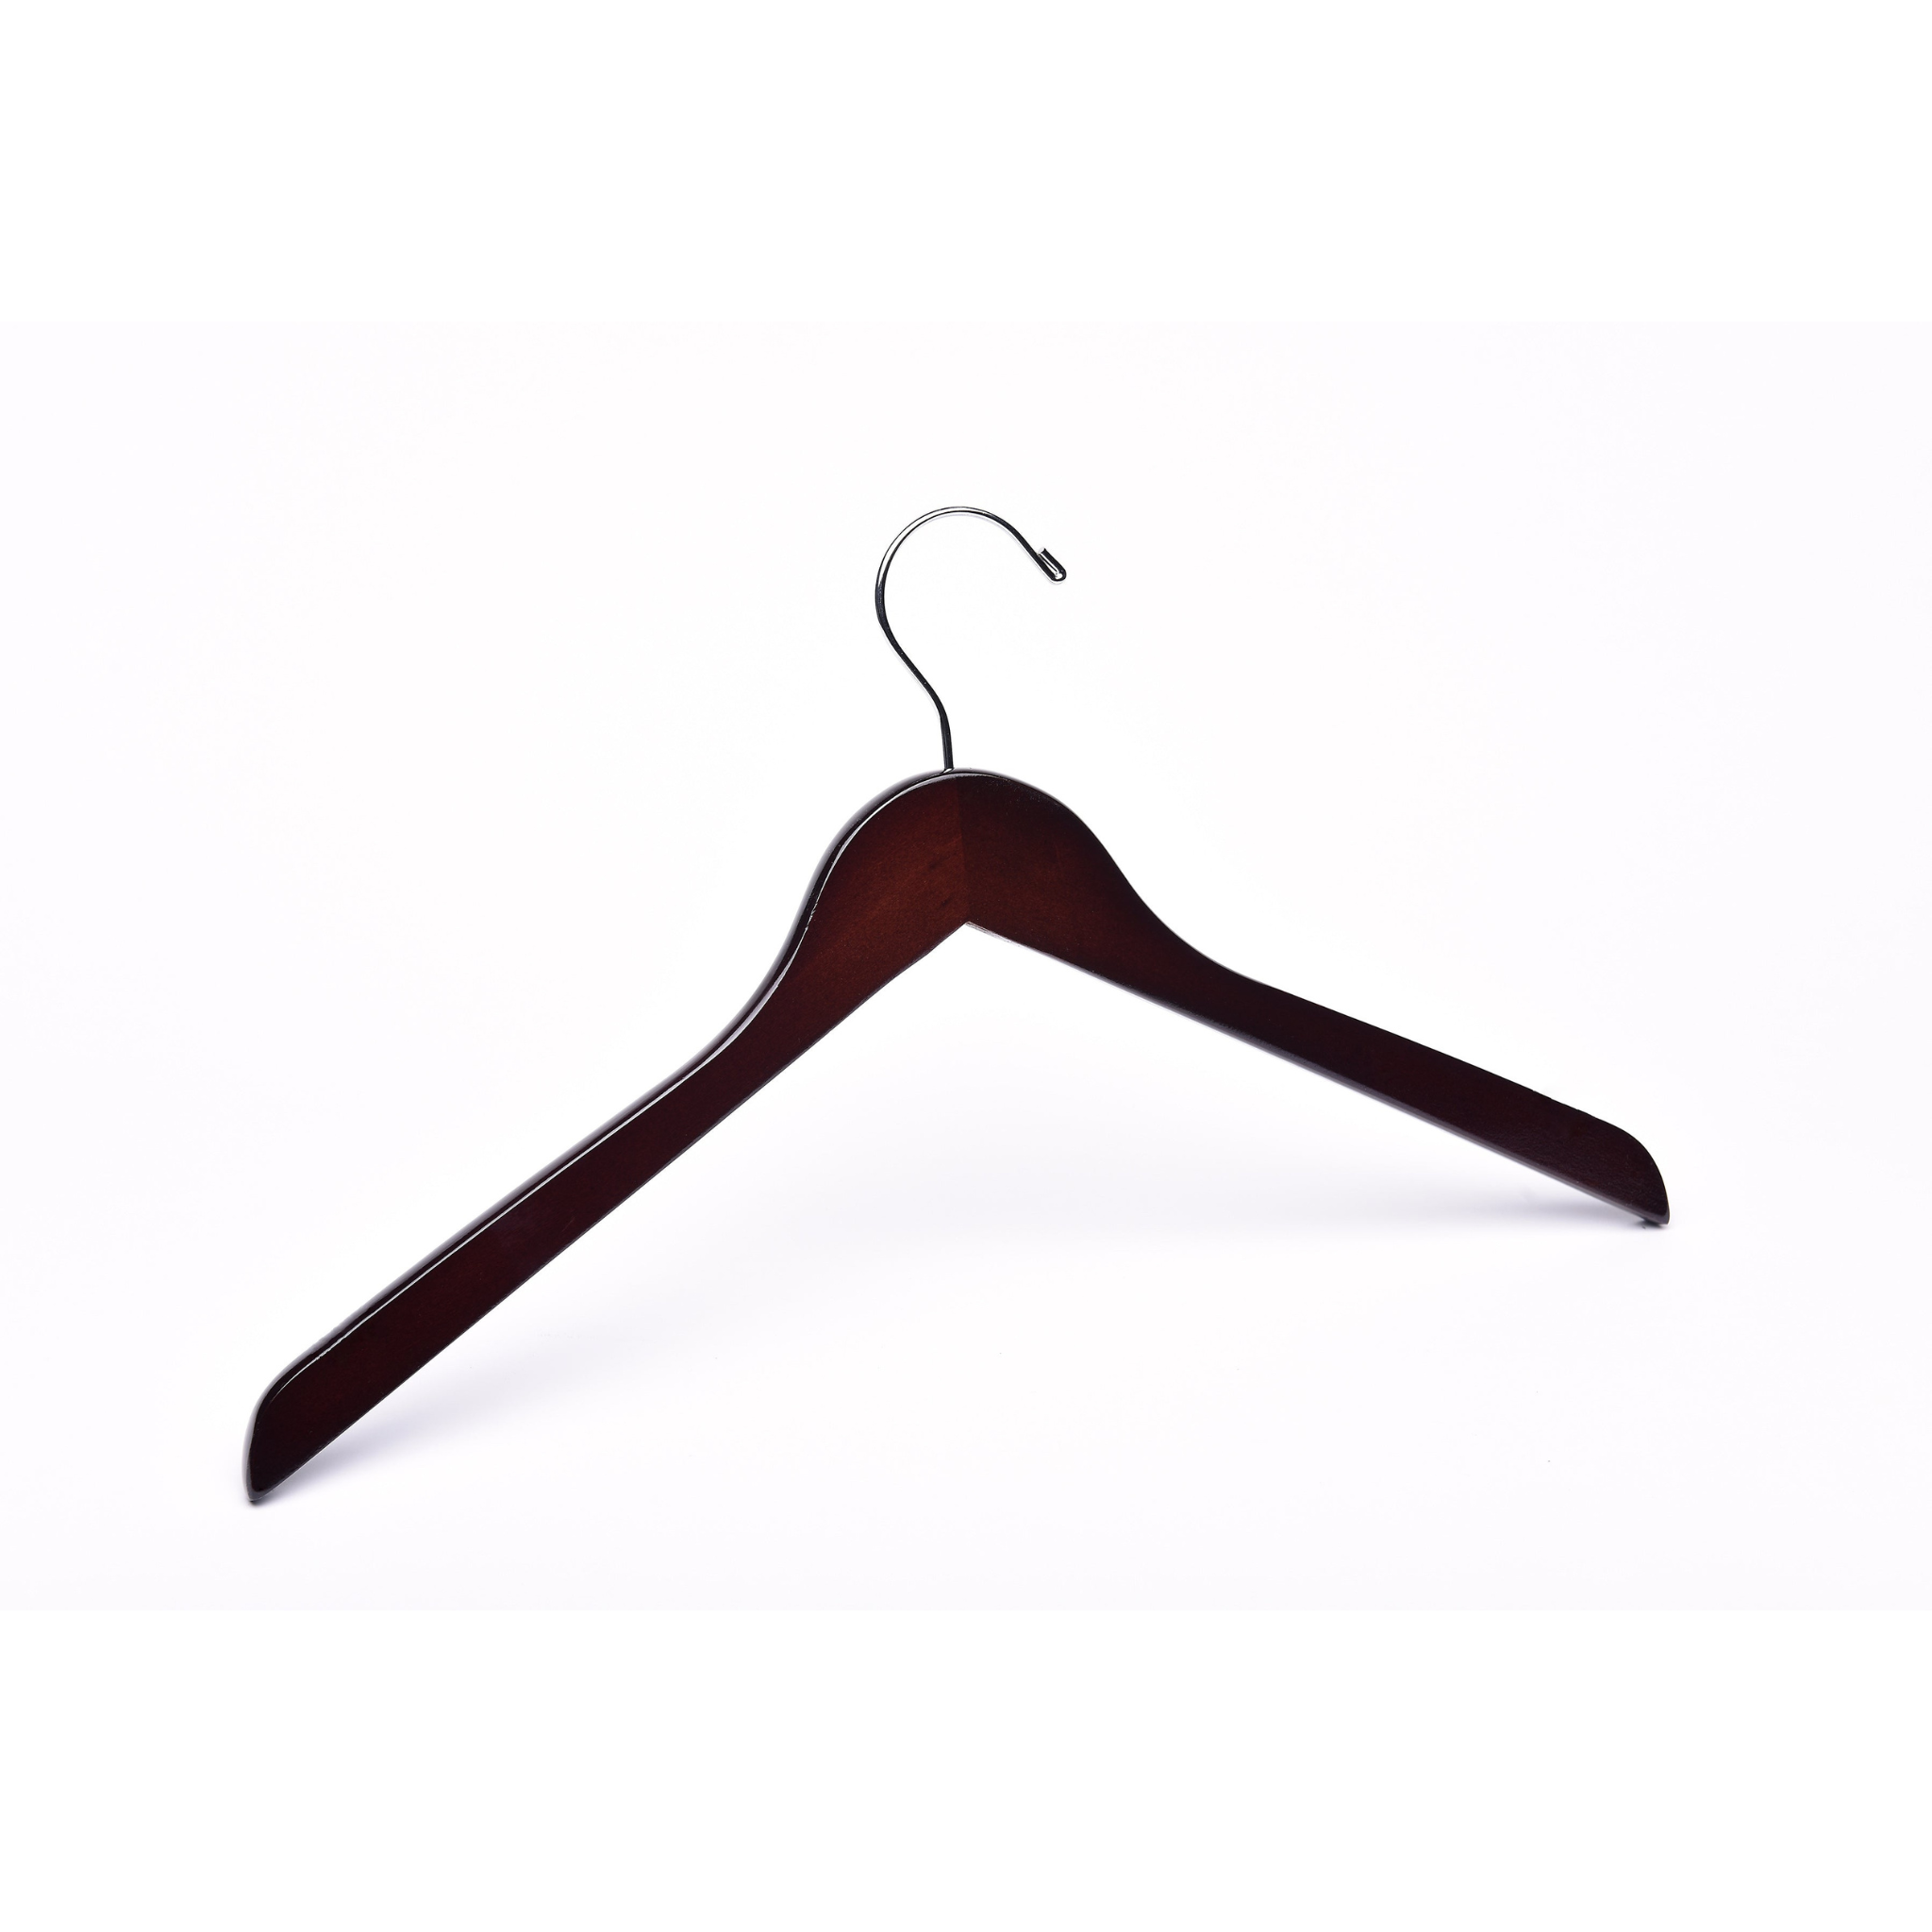 High Quality Dark Walnut Wood Top Hanger with no shoulder notches and a silver hook for closets and stores